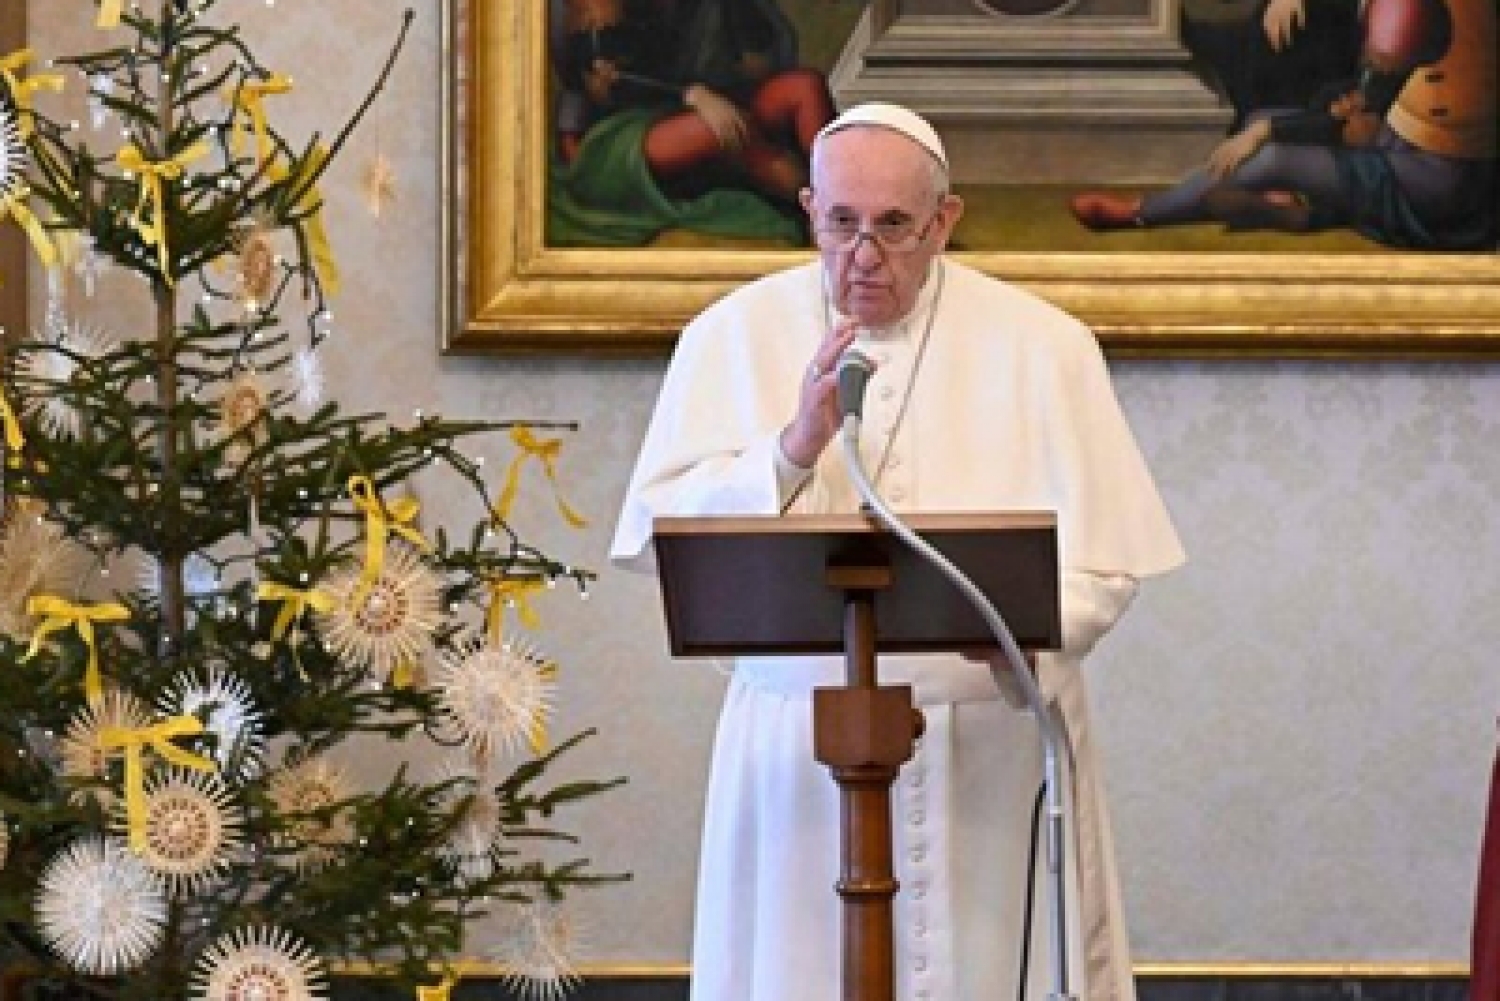 Light in darkness, Pope Francis said the prophet’s description